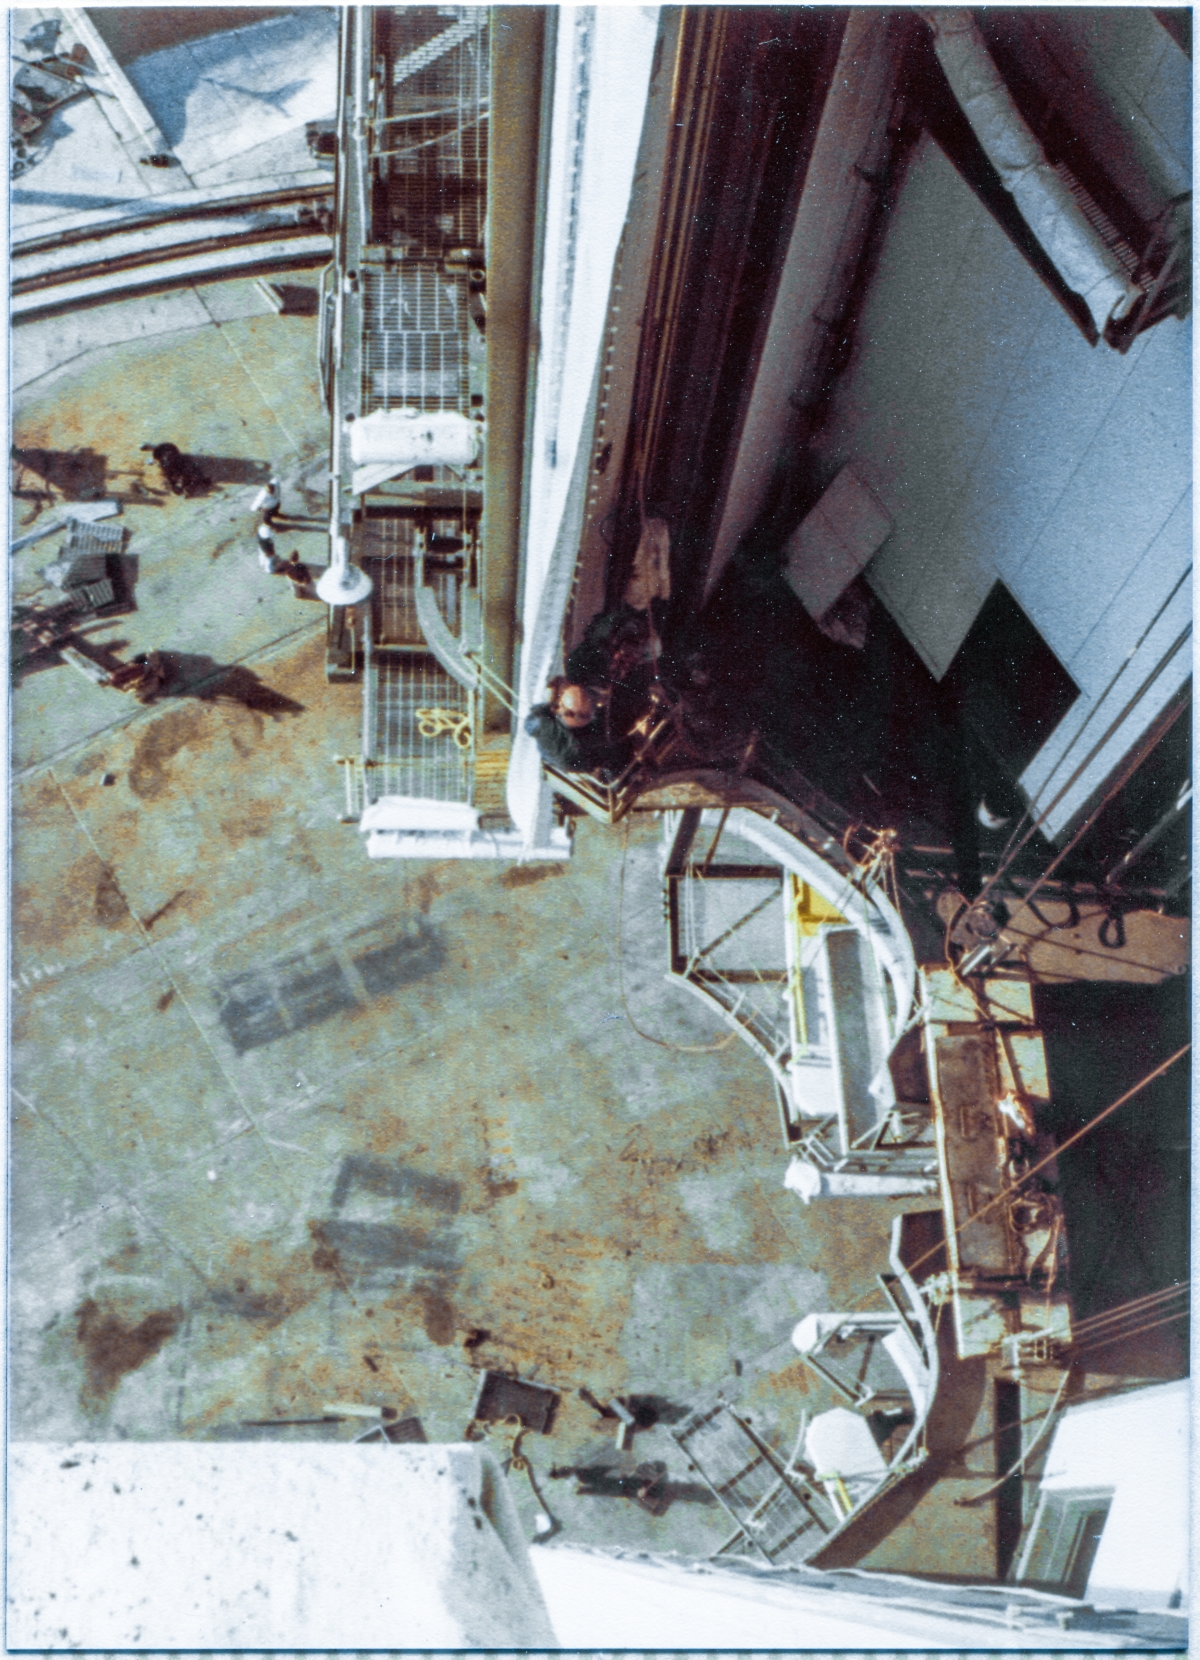 Image 038. Looking straight down, and across, from the Vehicle Access Platform at elevation  191’-0” on the Hinge Column side of the Rotating Service Structure at Space Shuttle Launch Complex 39-B, Kennedy Space Center, Florida. The concrete of the Pad Deck is 140 feet beneath you, and you can see a group of three people down there, in the upper left of the frame. To the right of them, just above the center of the frame, suspended in a spider basket, a Union Ironworker from Local 808, working for Wilhoit Steel Erectors, can be seen attaching a long white Inflatable Seal to the Right Orbiter Side Seal Panel. To the right of and below our ironworker, the distinctive shape of the Space Shuttle’s OMS Pods and Tail is outlined in the framing steel and platforms at elevations 135’-7” which is the Payload Changeout Room’s main floor level, 125’-0” which is the APU Servicing Platform level, and 112’-0” which is the APS Servicing Platform level, and is also the lowest main level of the RSS. When the RSS is swung around and mated to the Orbiter, the orbiter’s aft end will fill these distinctive shapes like a hand fitting inside a glove. Photo by James MacLaren.